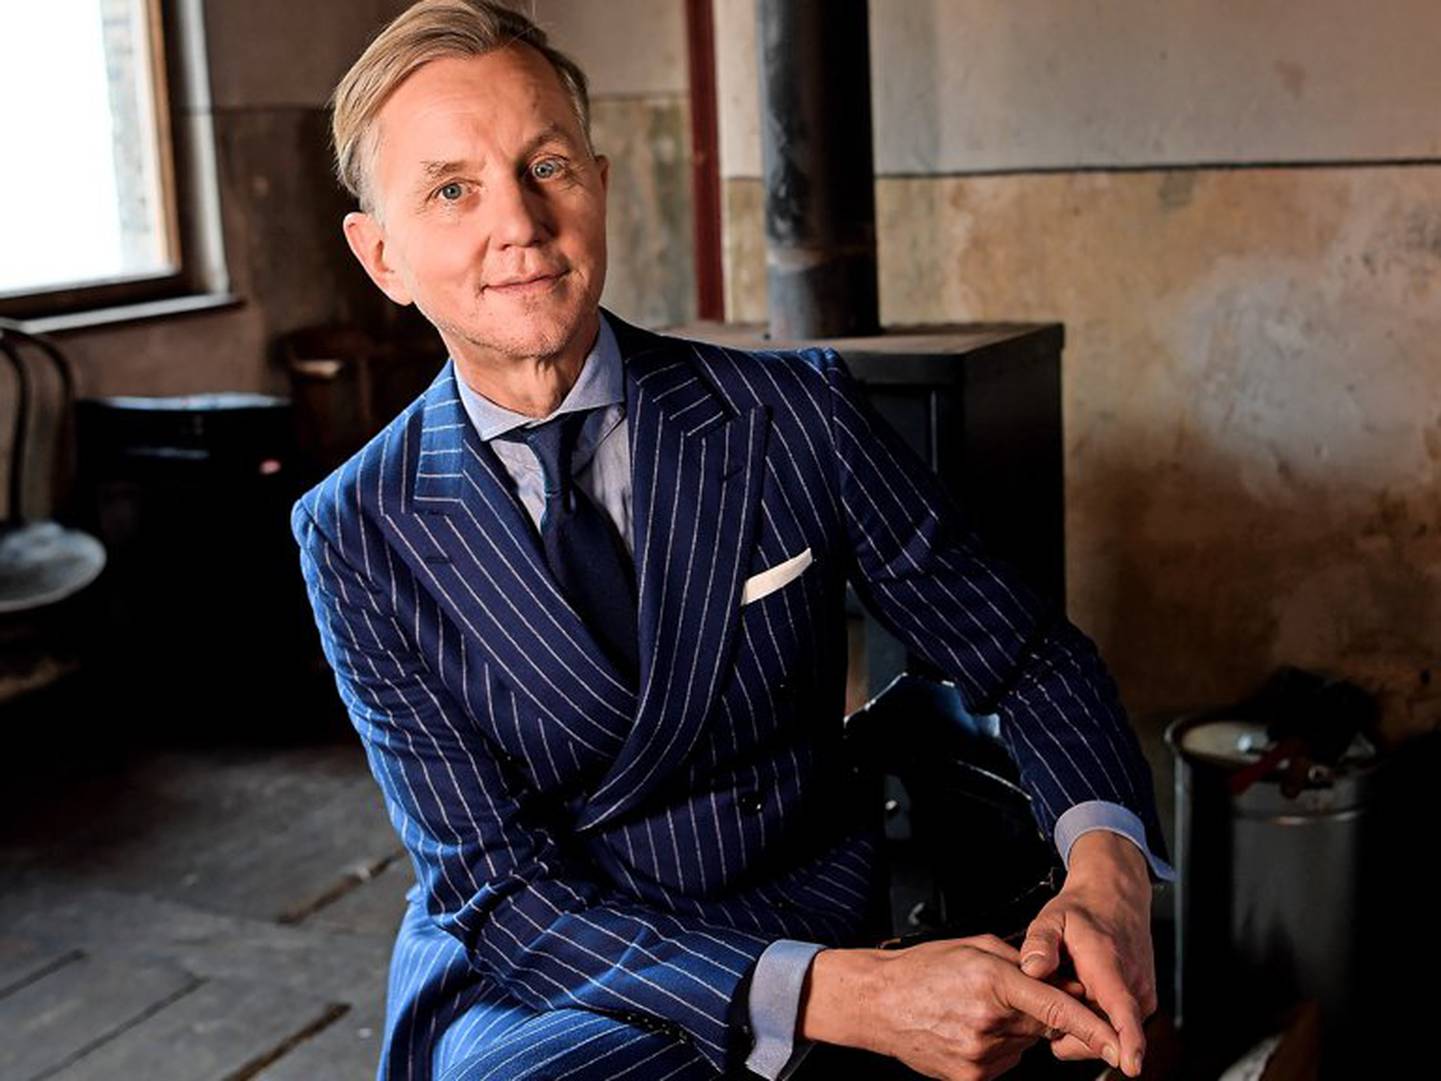 Max Raabe am Anfang seiner Karriere